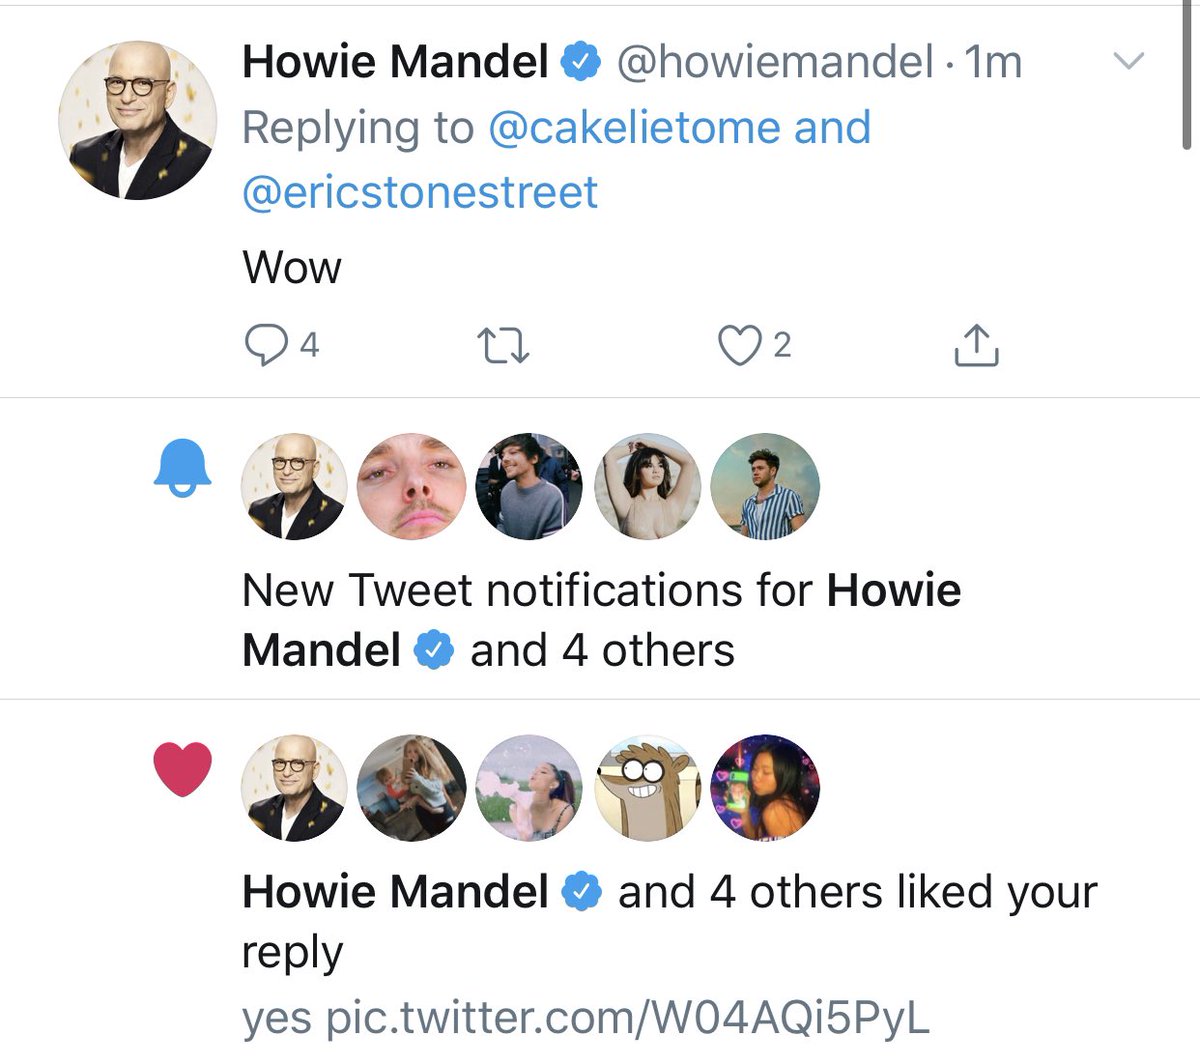 if y’all excuse me, it’s been a while since i updated this thread and howie liked and replied so ~23.06.20